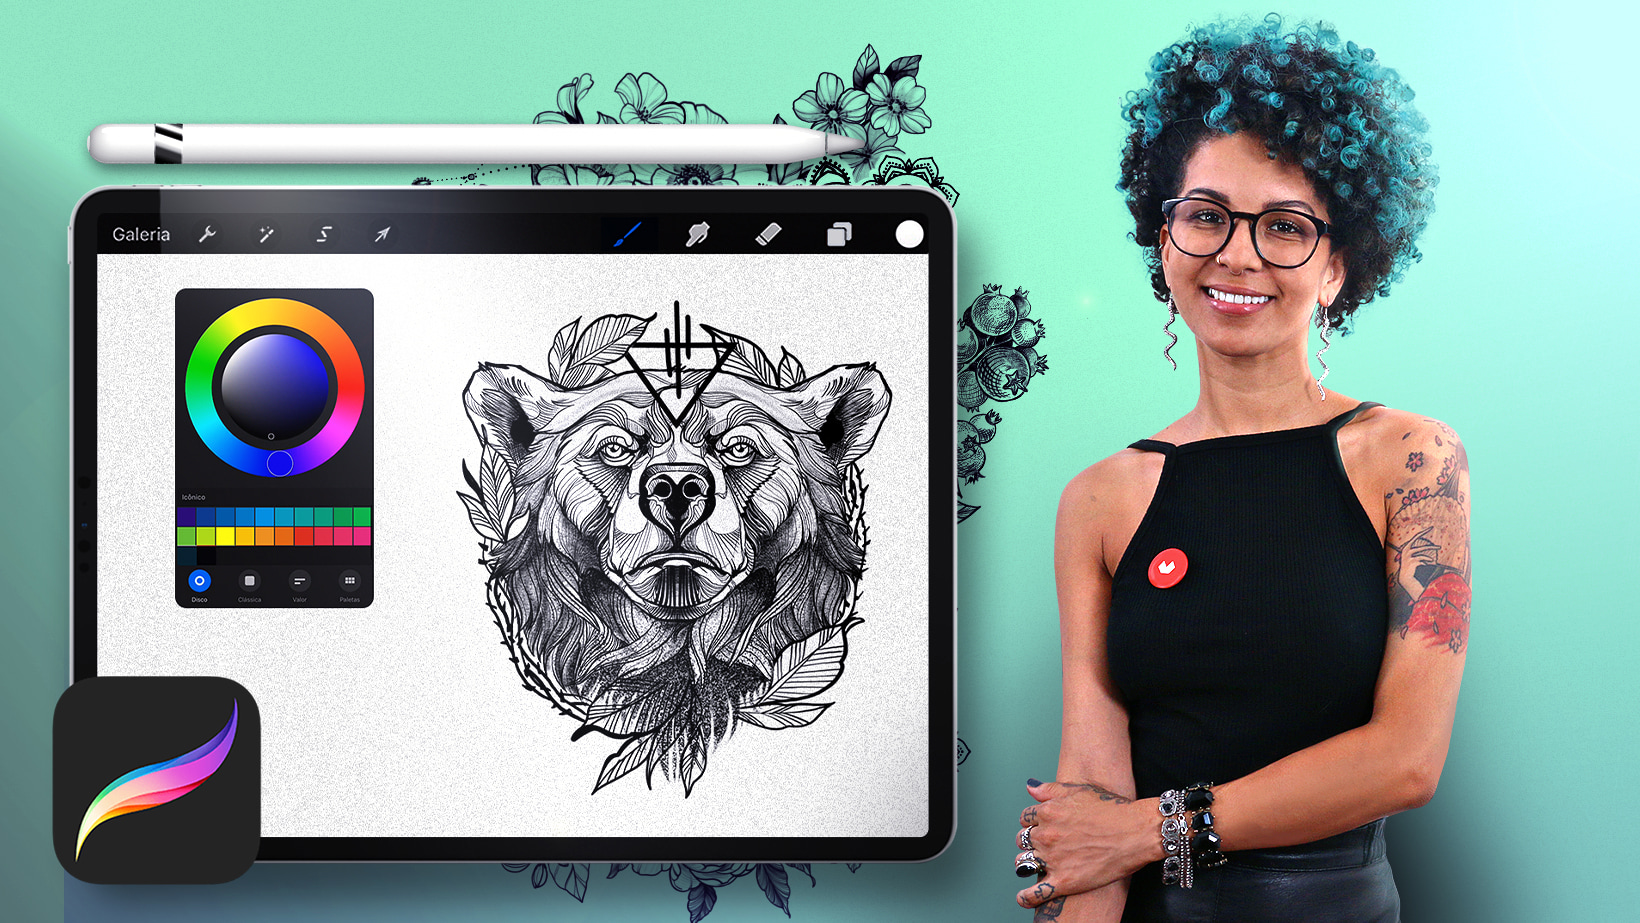 Online Course - Digital Design and Illustration of Tattoos with Procreate (Tania Maia)